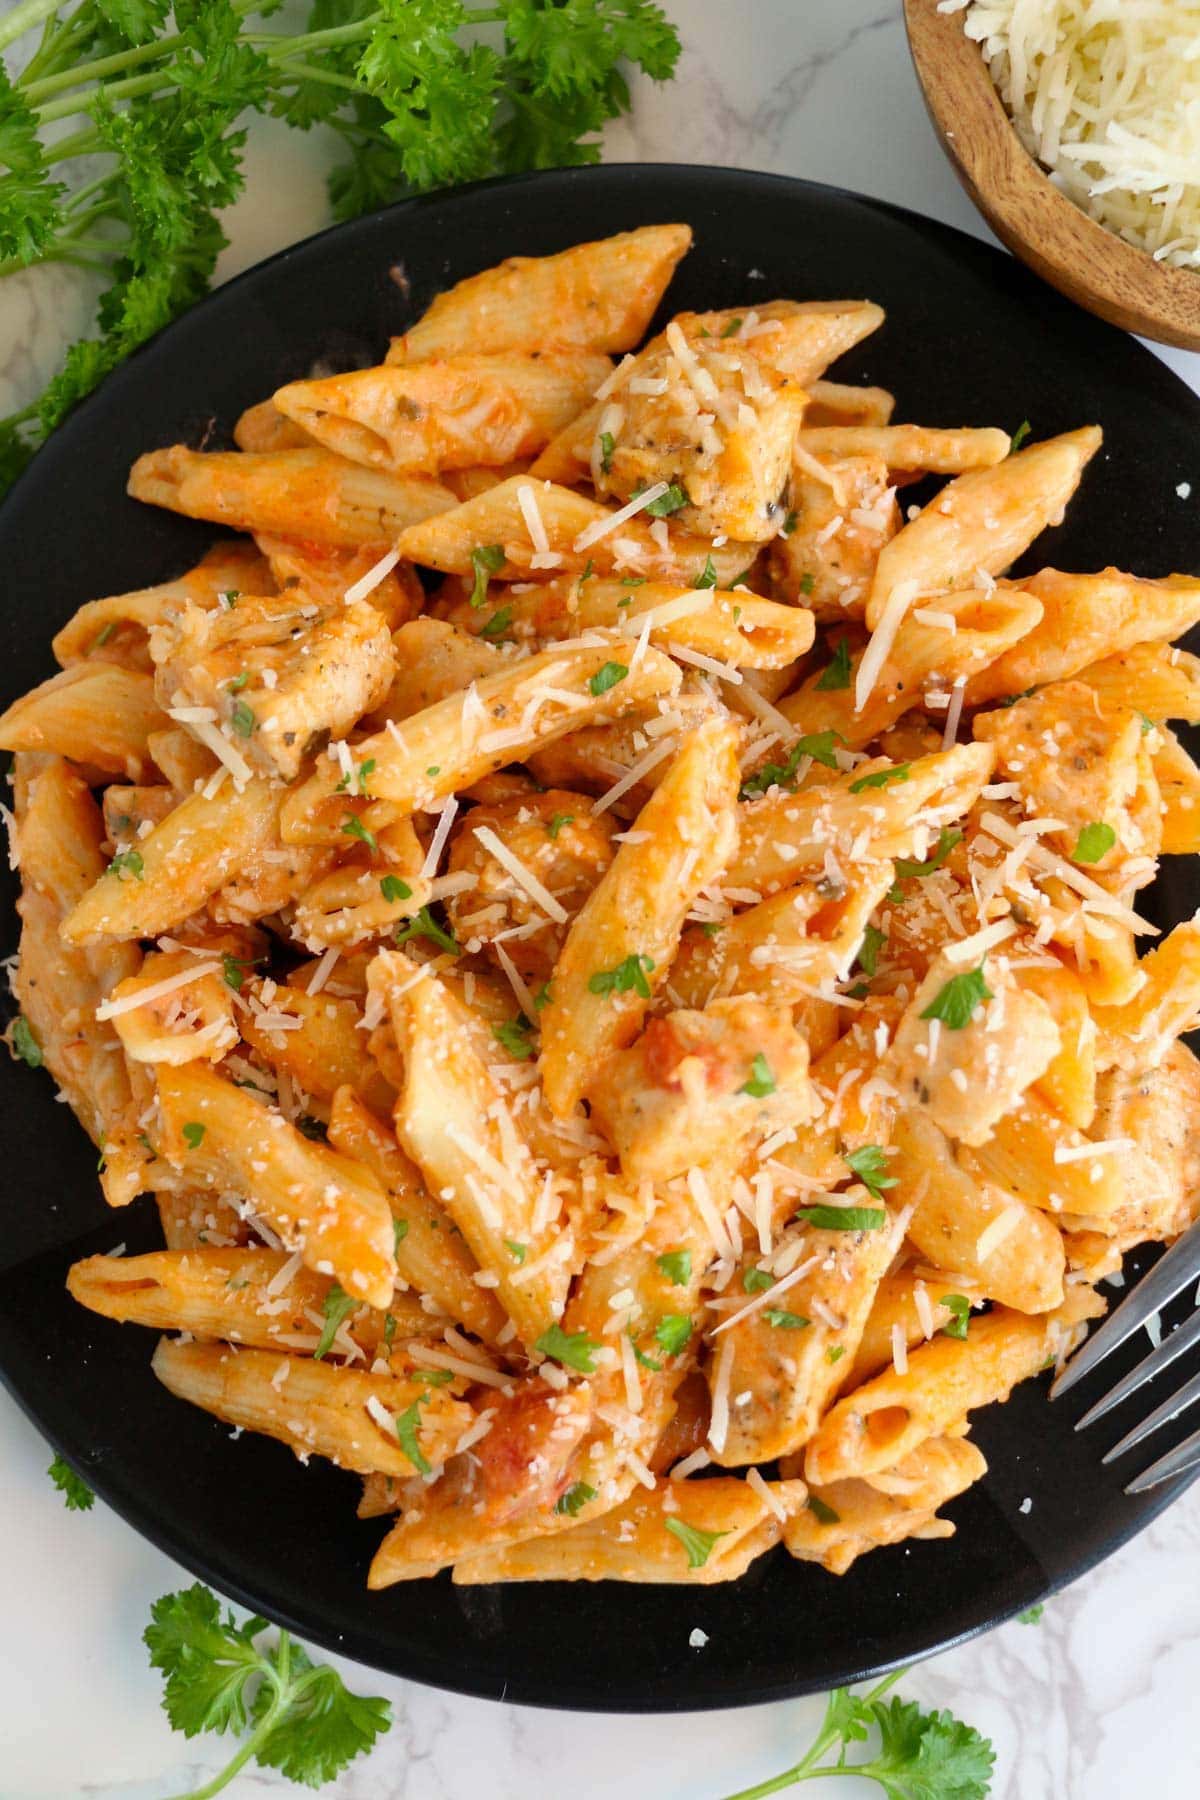 a black plate surrounded by parsley, with penne pasta dn chicken in a creamy tomato sauce